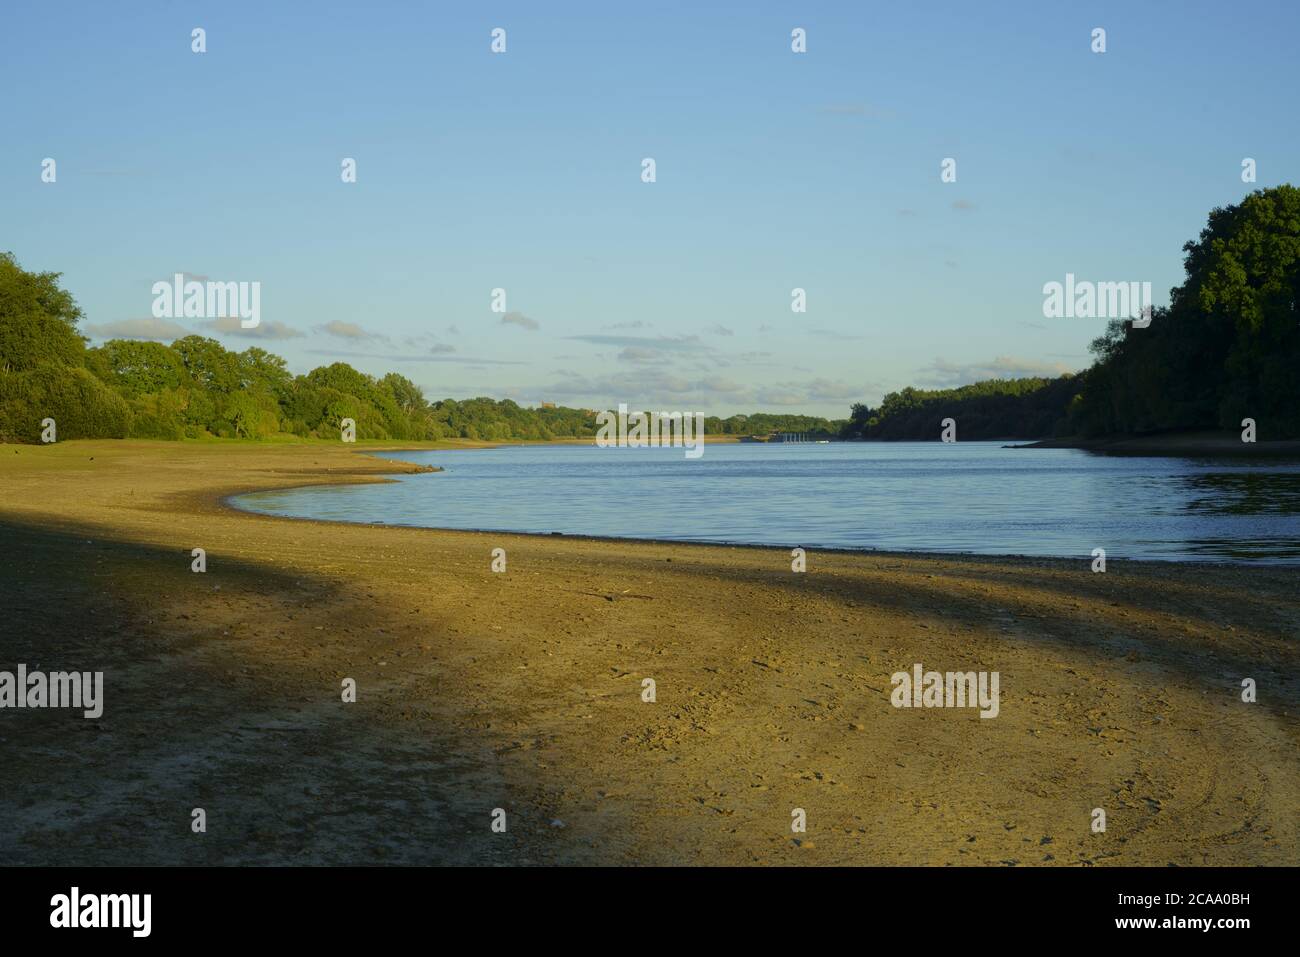 August 2020 low water level at Ardingly reservoir in West Sussex UK. Stock Photo